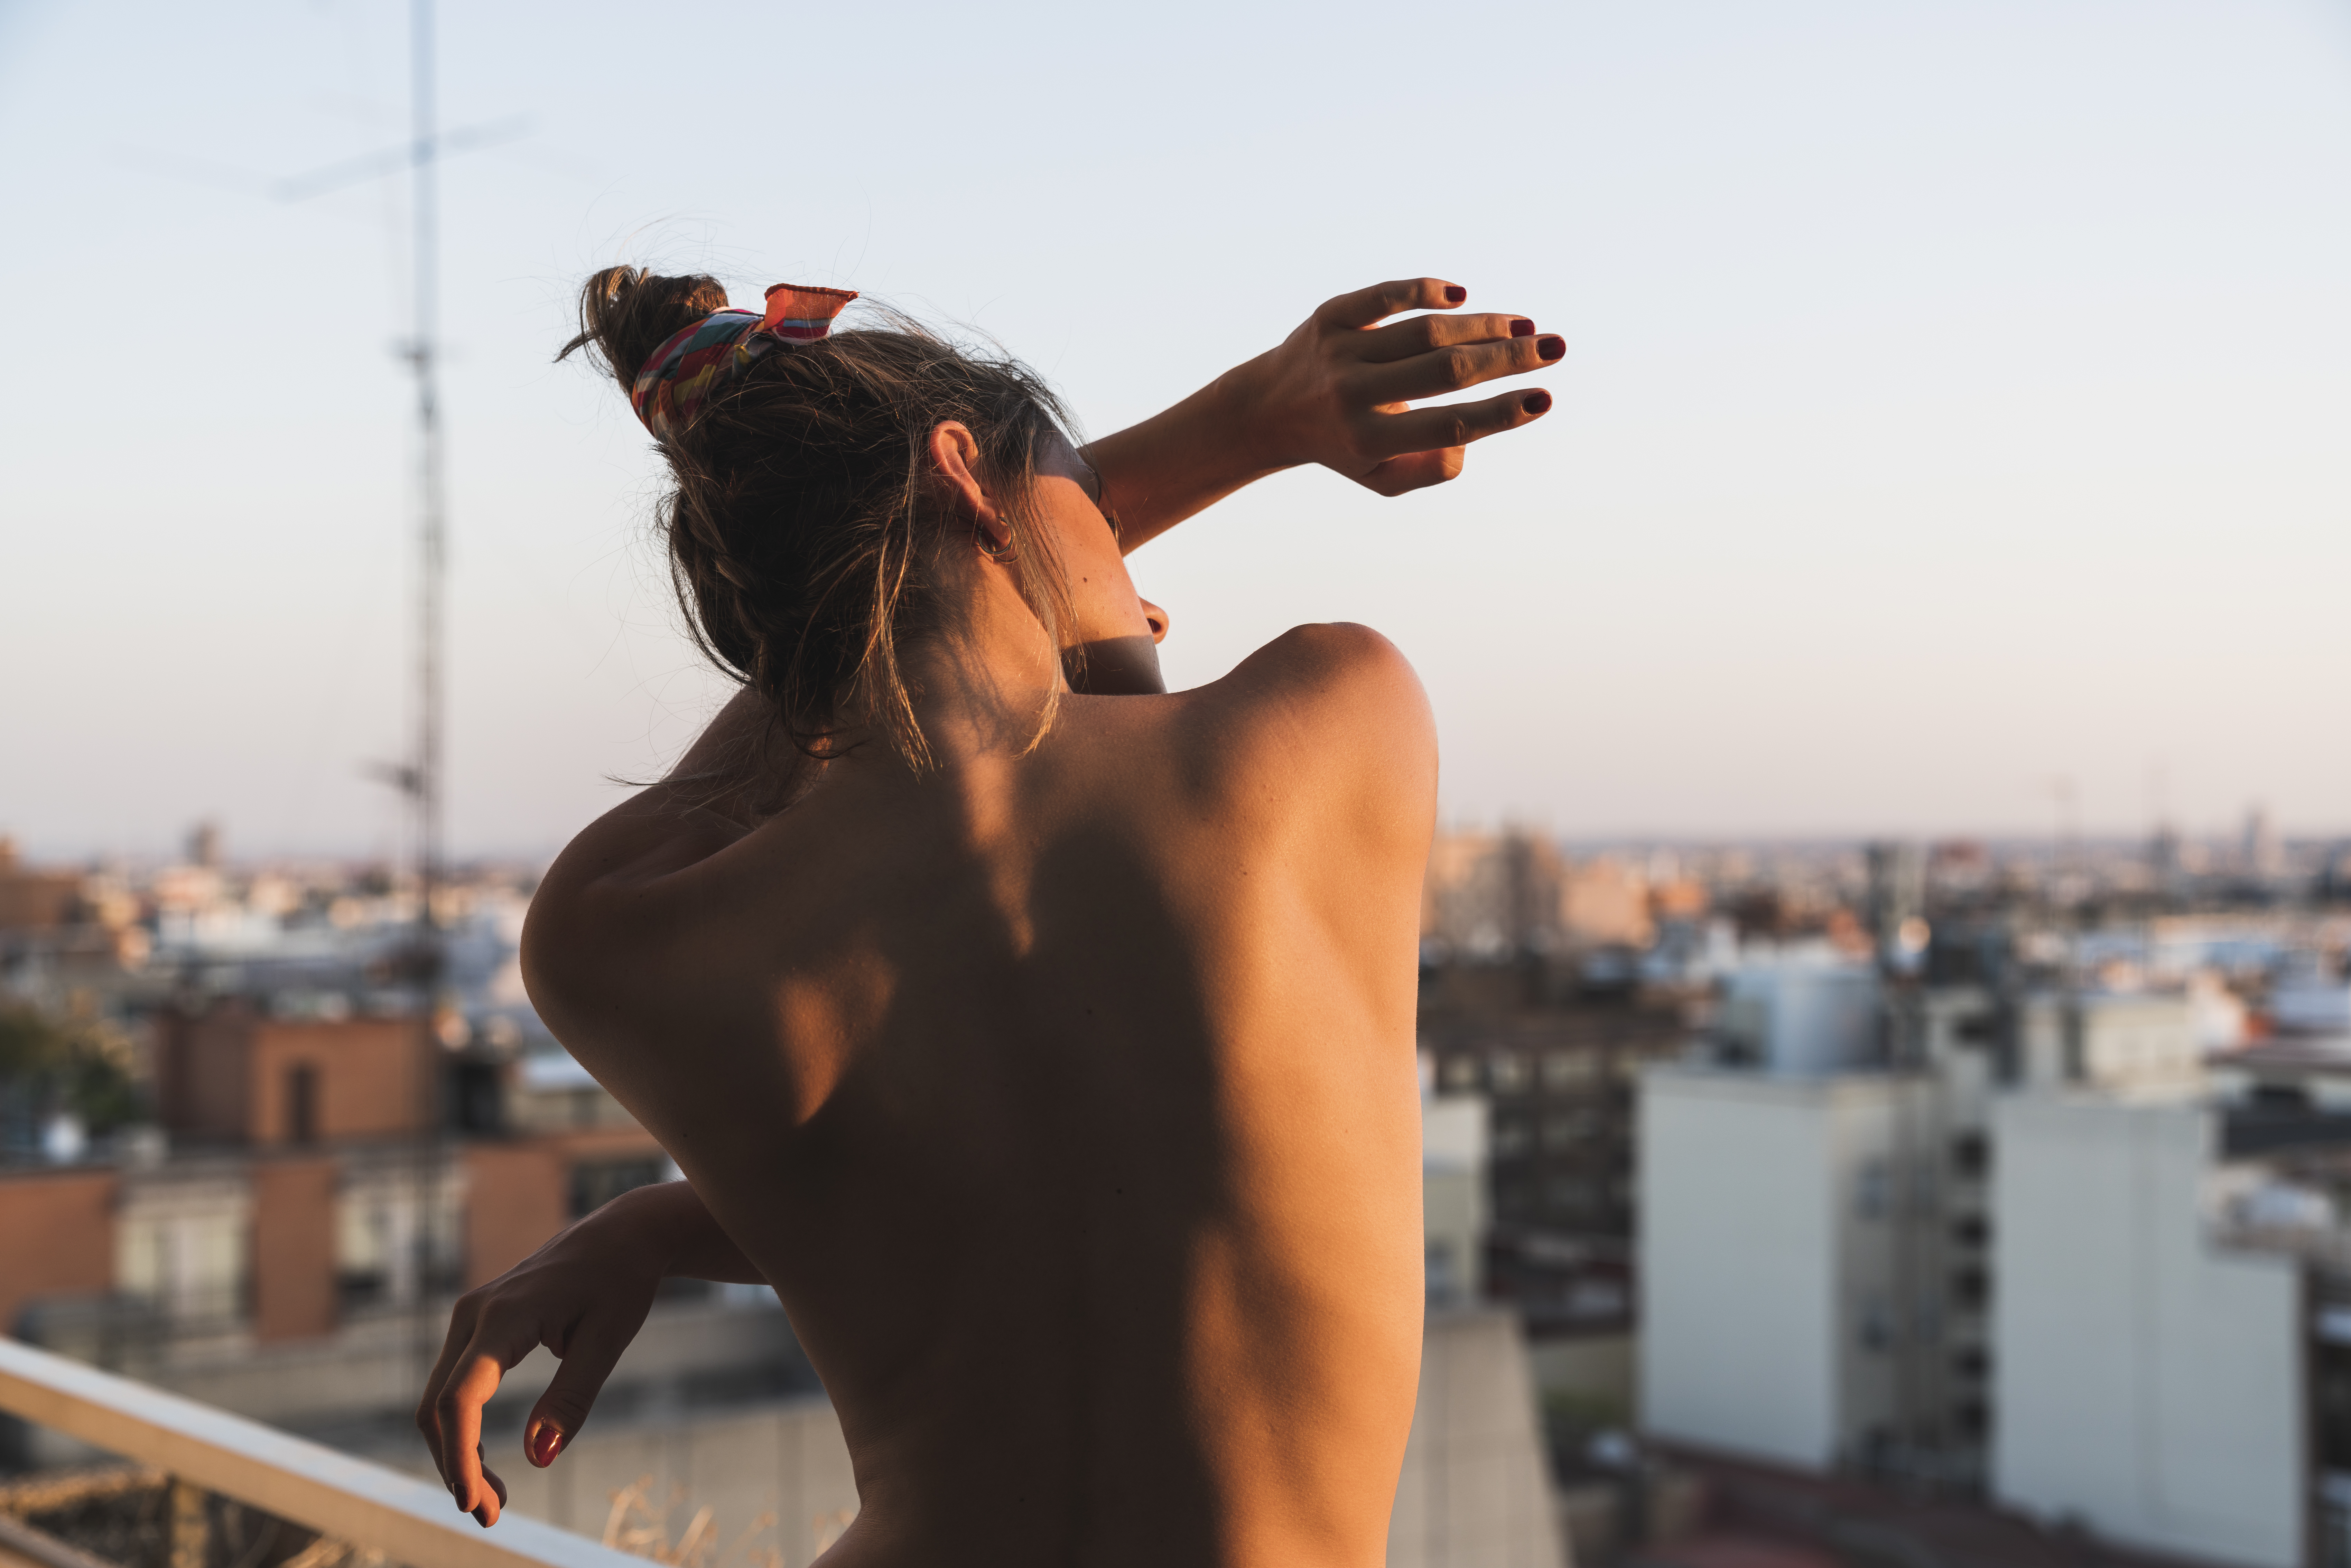 Rear view of topless young woman standing on balcony